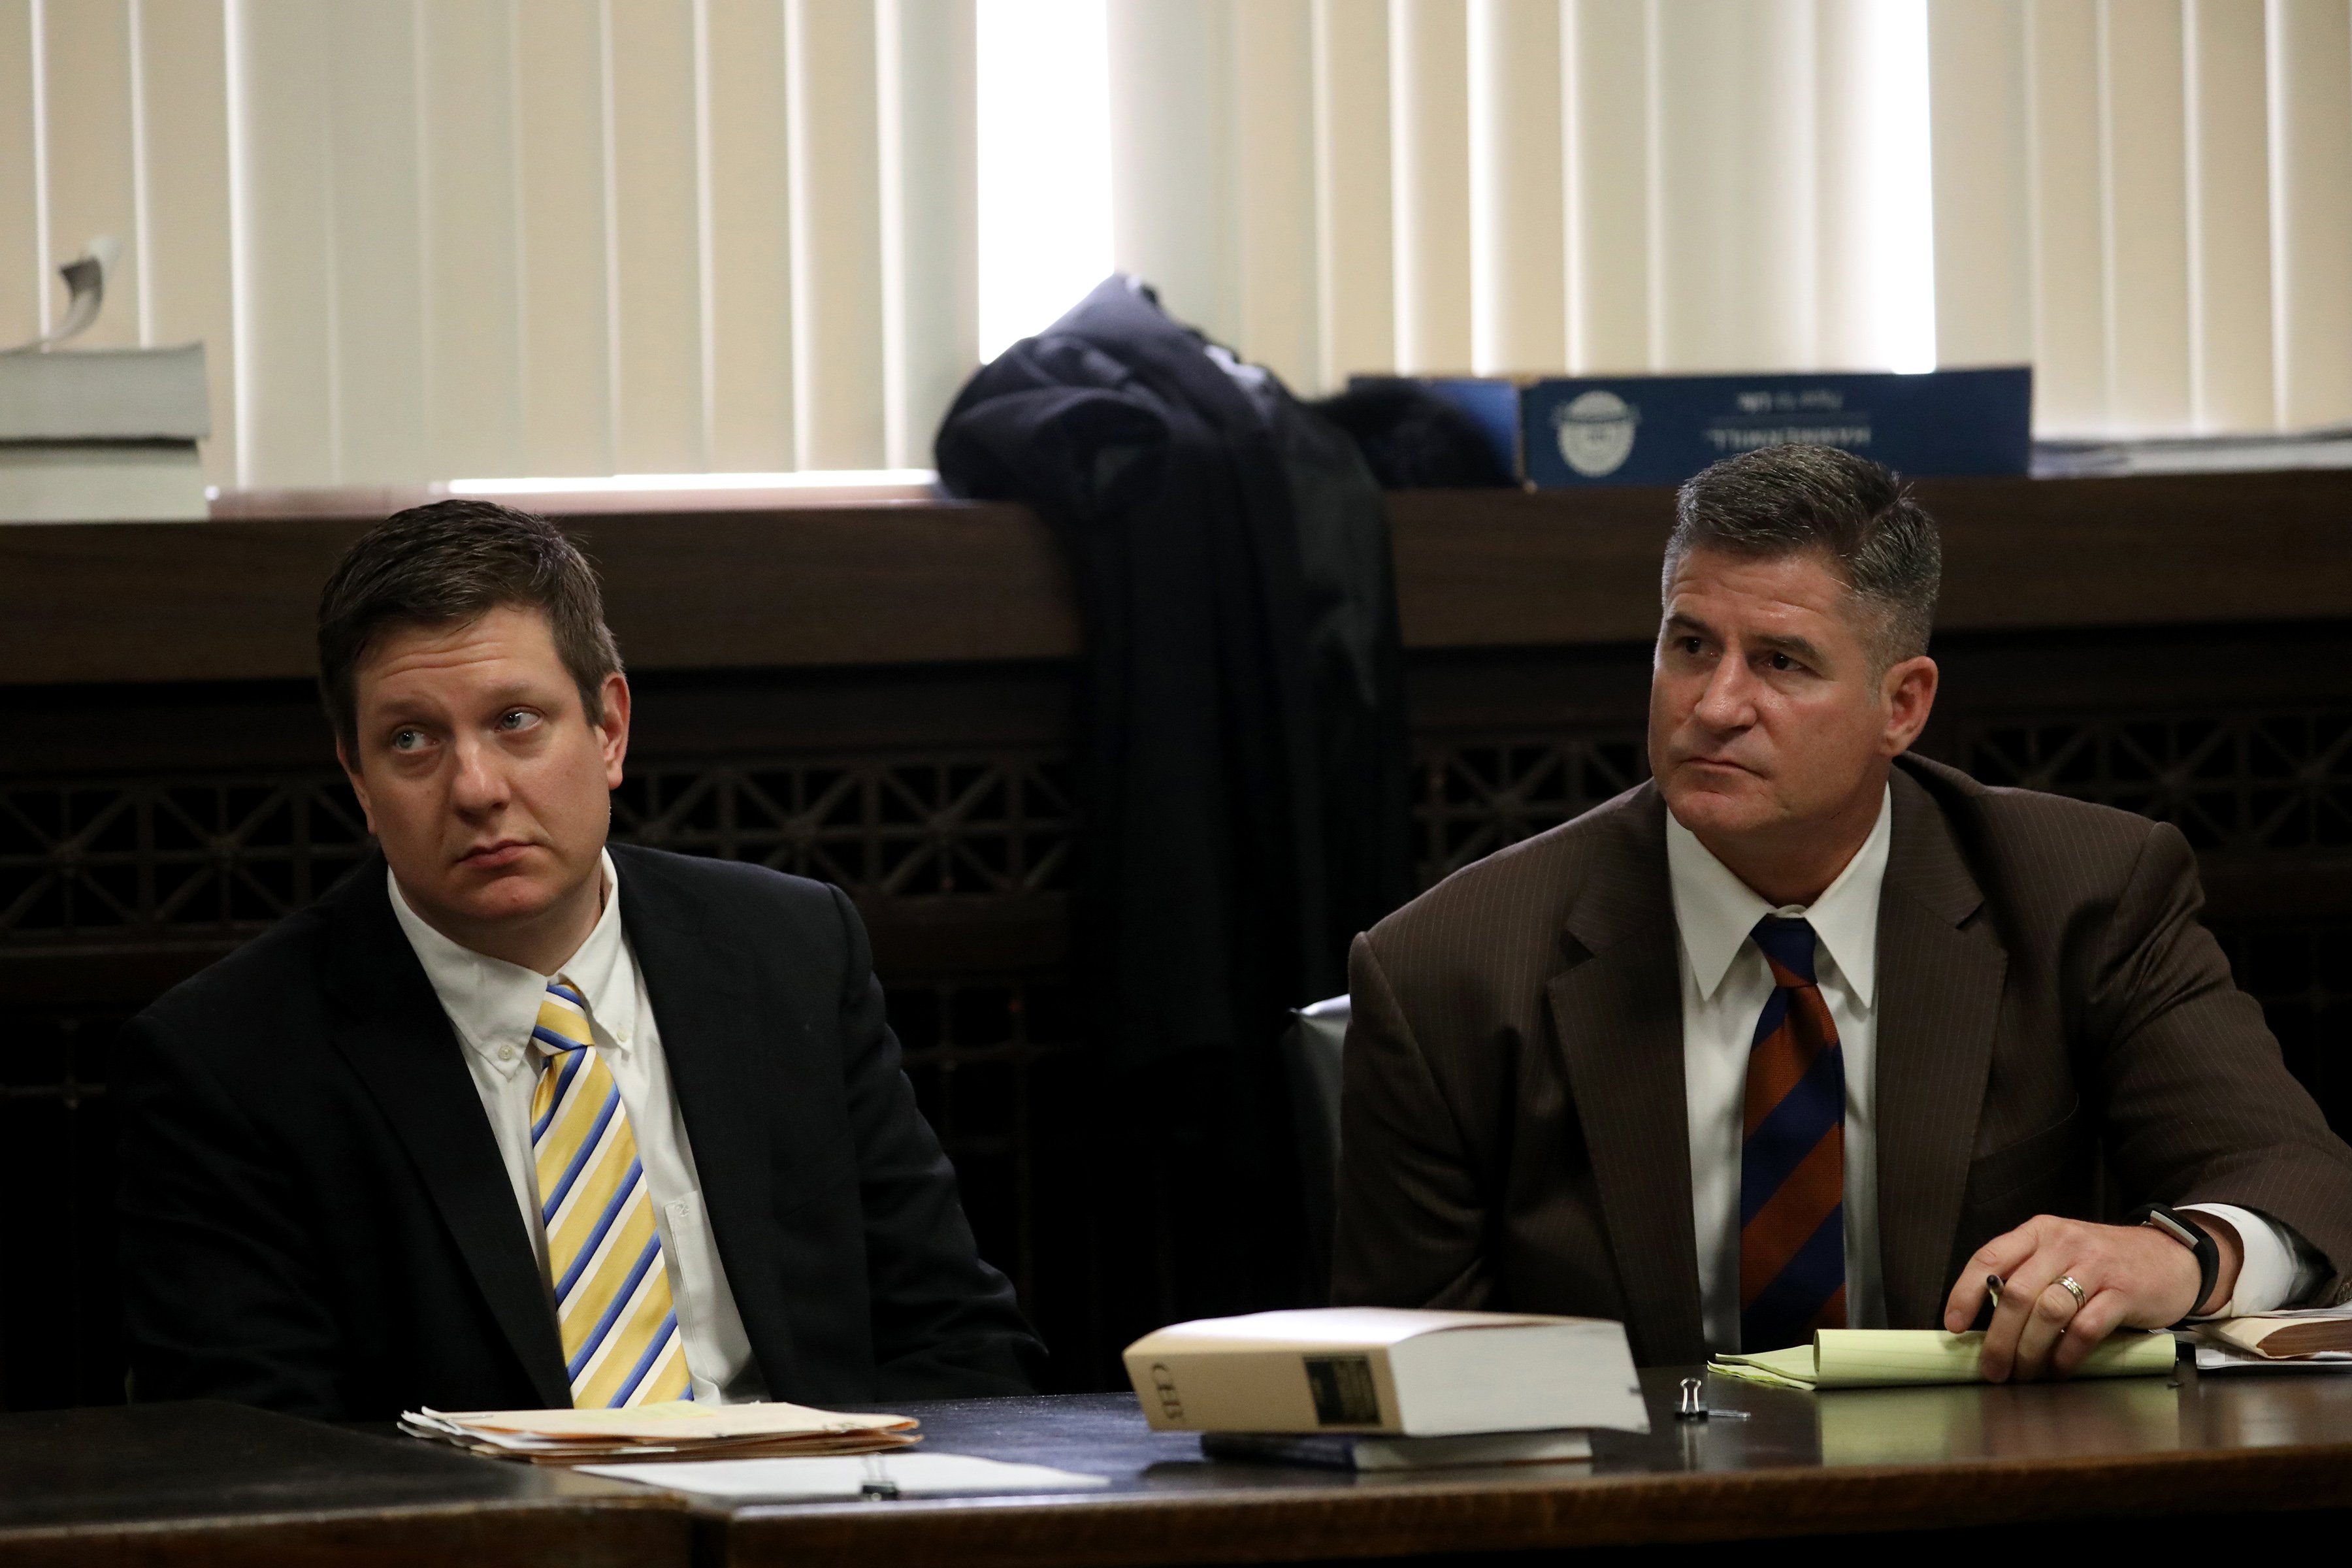 Jason Van Dyke, left, sits with his attorney Daniel Herbert at his hearing at Leighton Criminal Court in Chicago Wednesday April 18, 2018.    (Nancy Stone / Chicago Tribune / Pool)